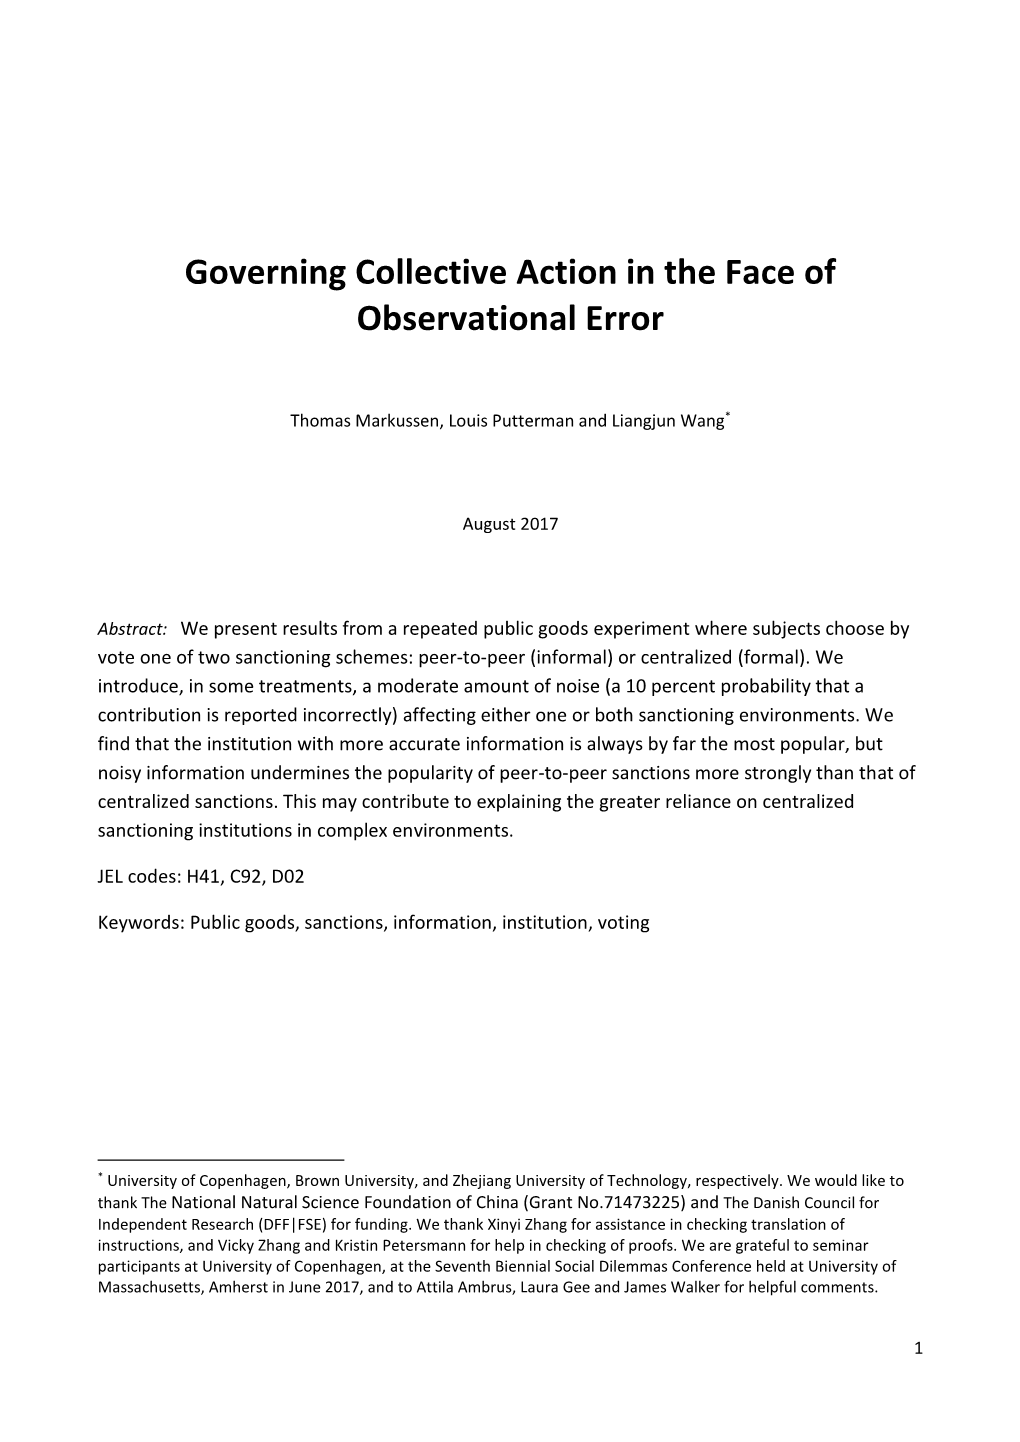 Governing Collective Action in the Face of Observational Error